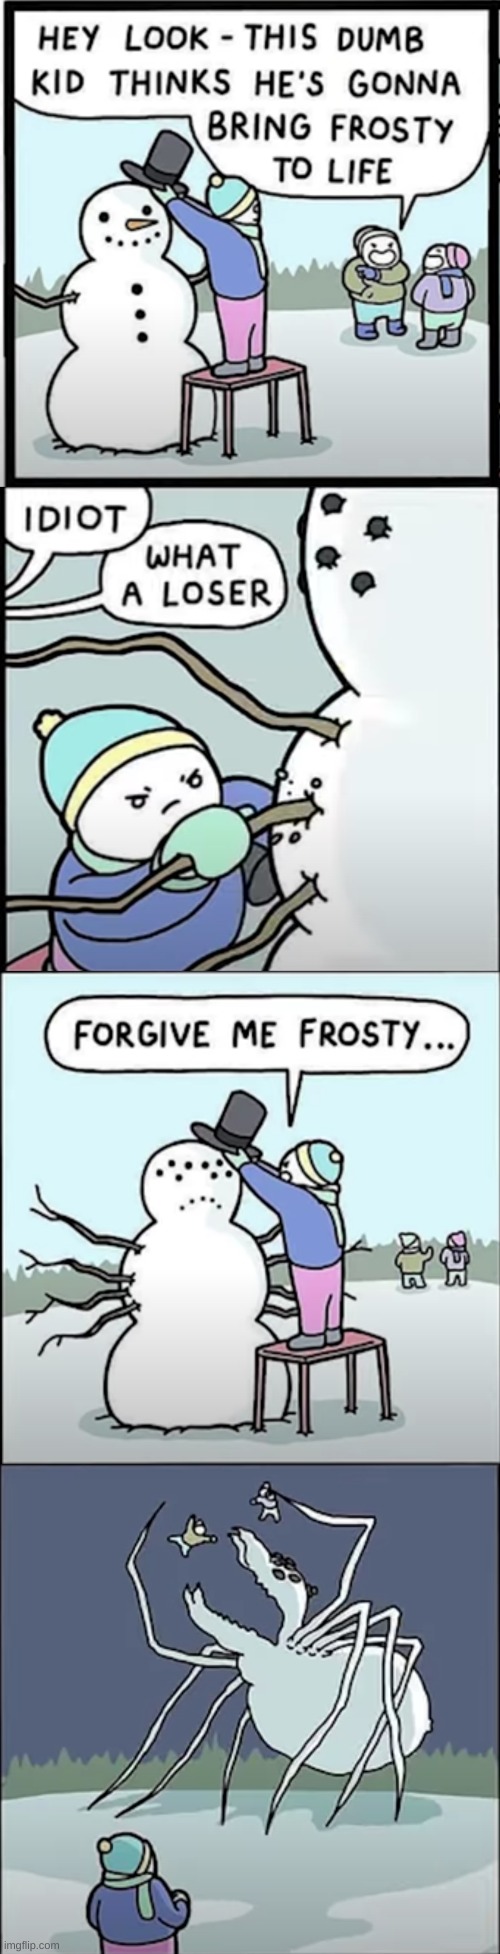 instant karma at its finest | image tagged in comics,frosty the snowman,spider | made w/ Imgflip meme maker